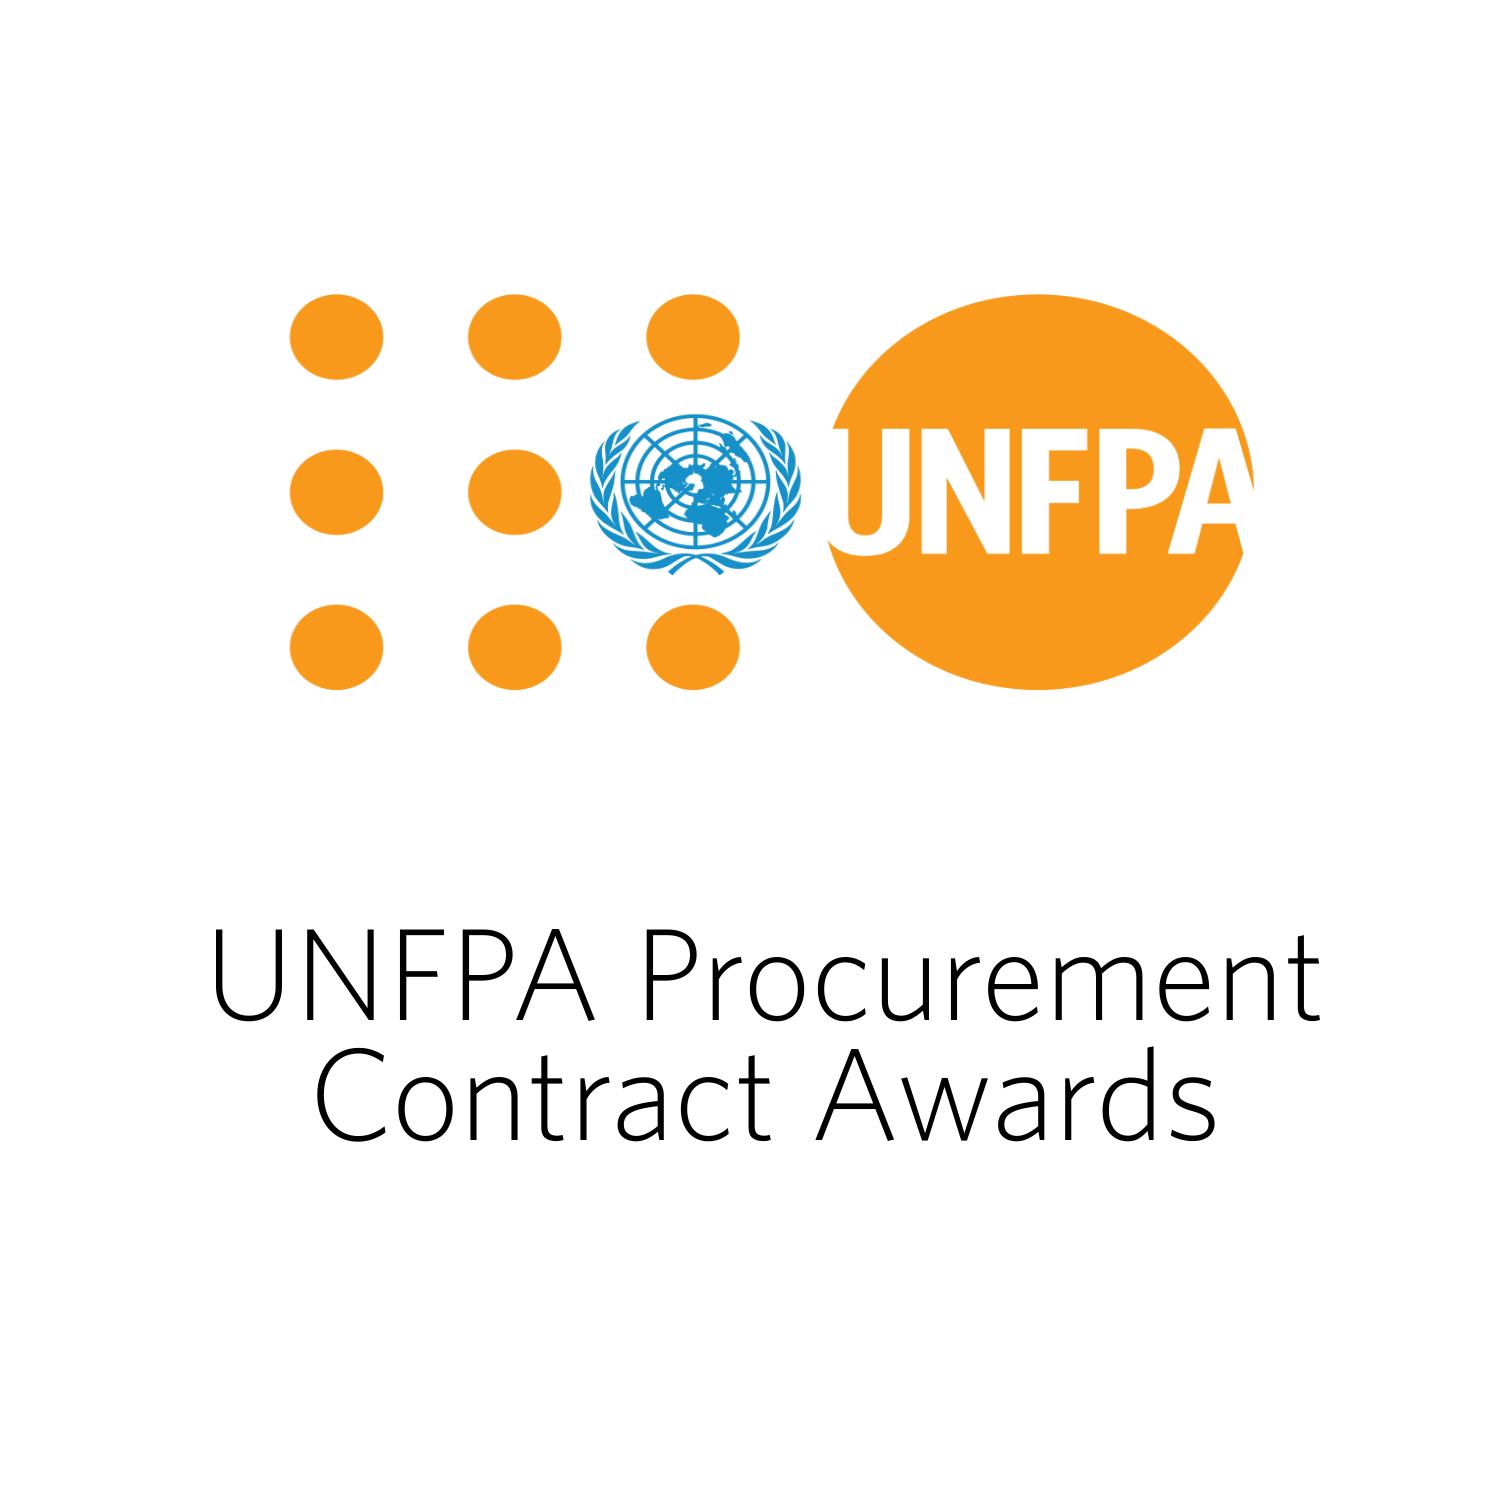 Procurement Contract Awards January 2021 to March 2021